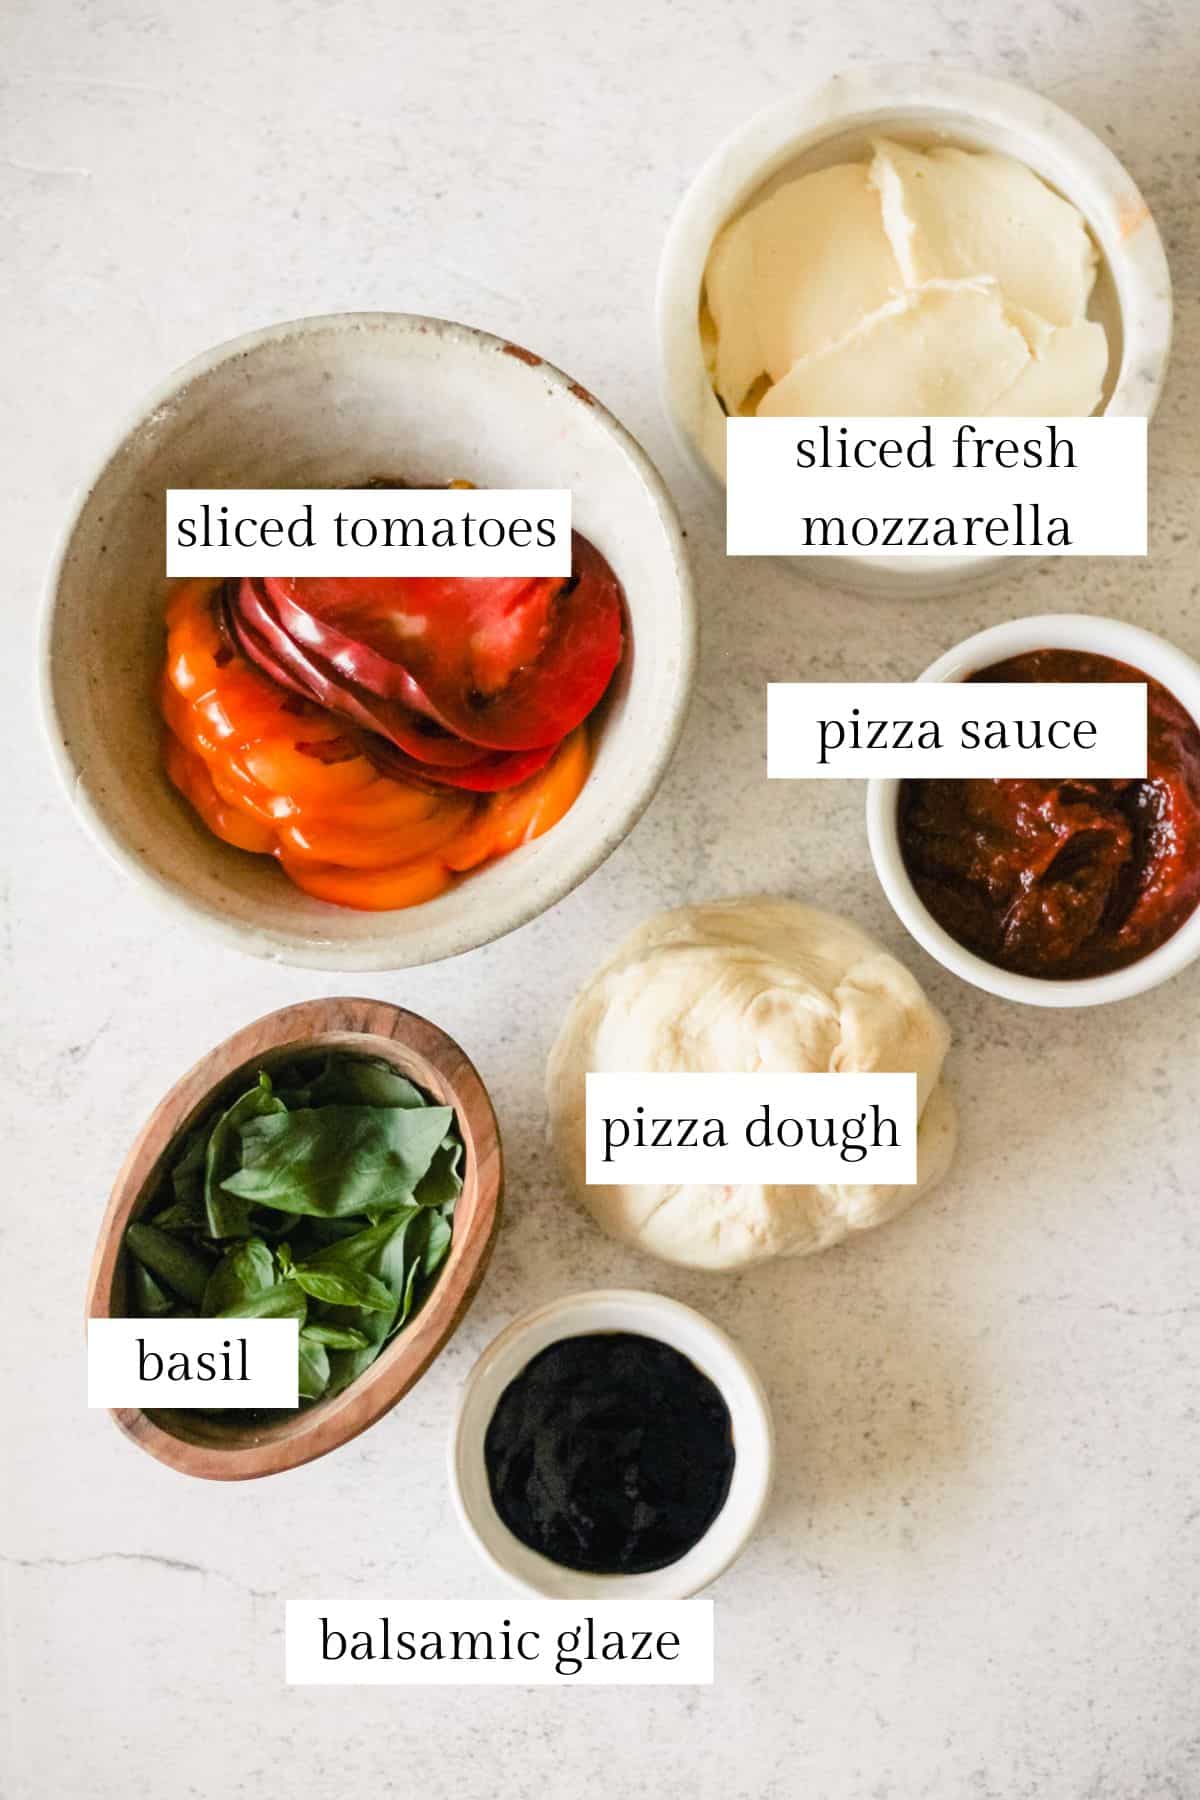 Labeled ingredients for making caprese pizza.